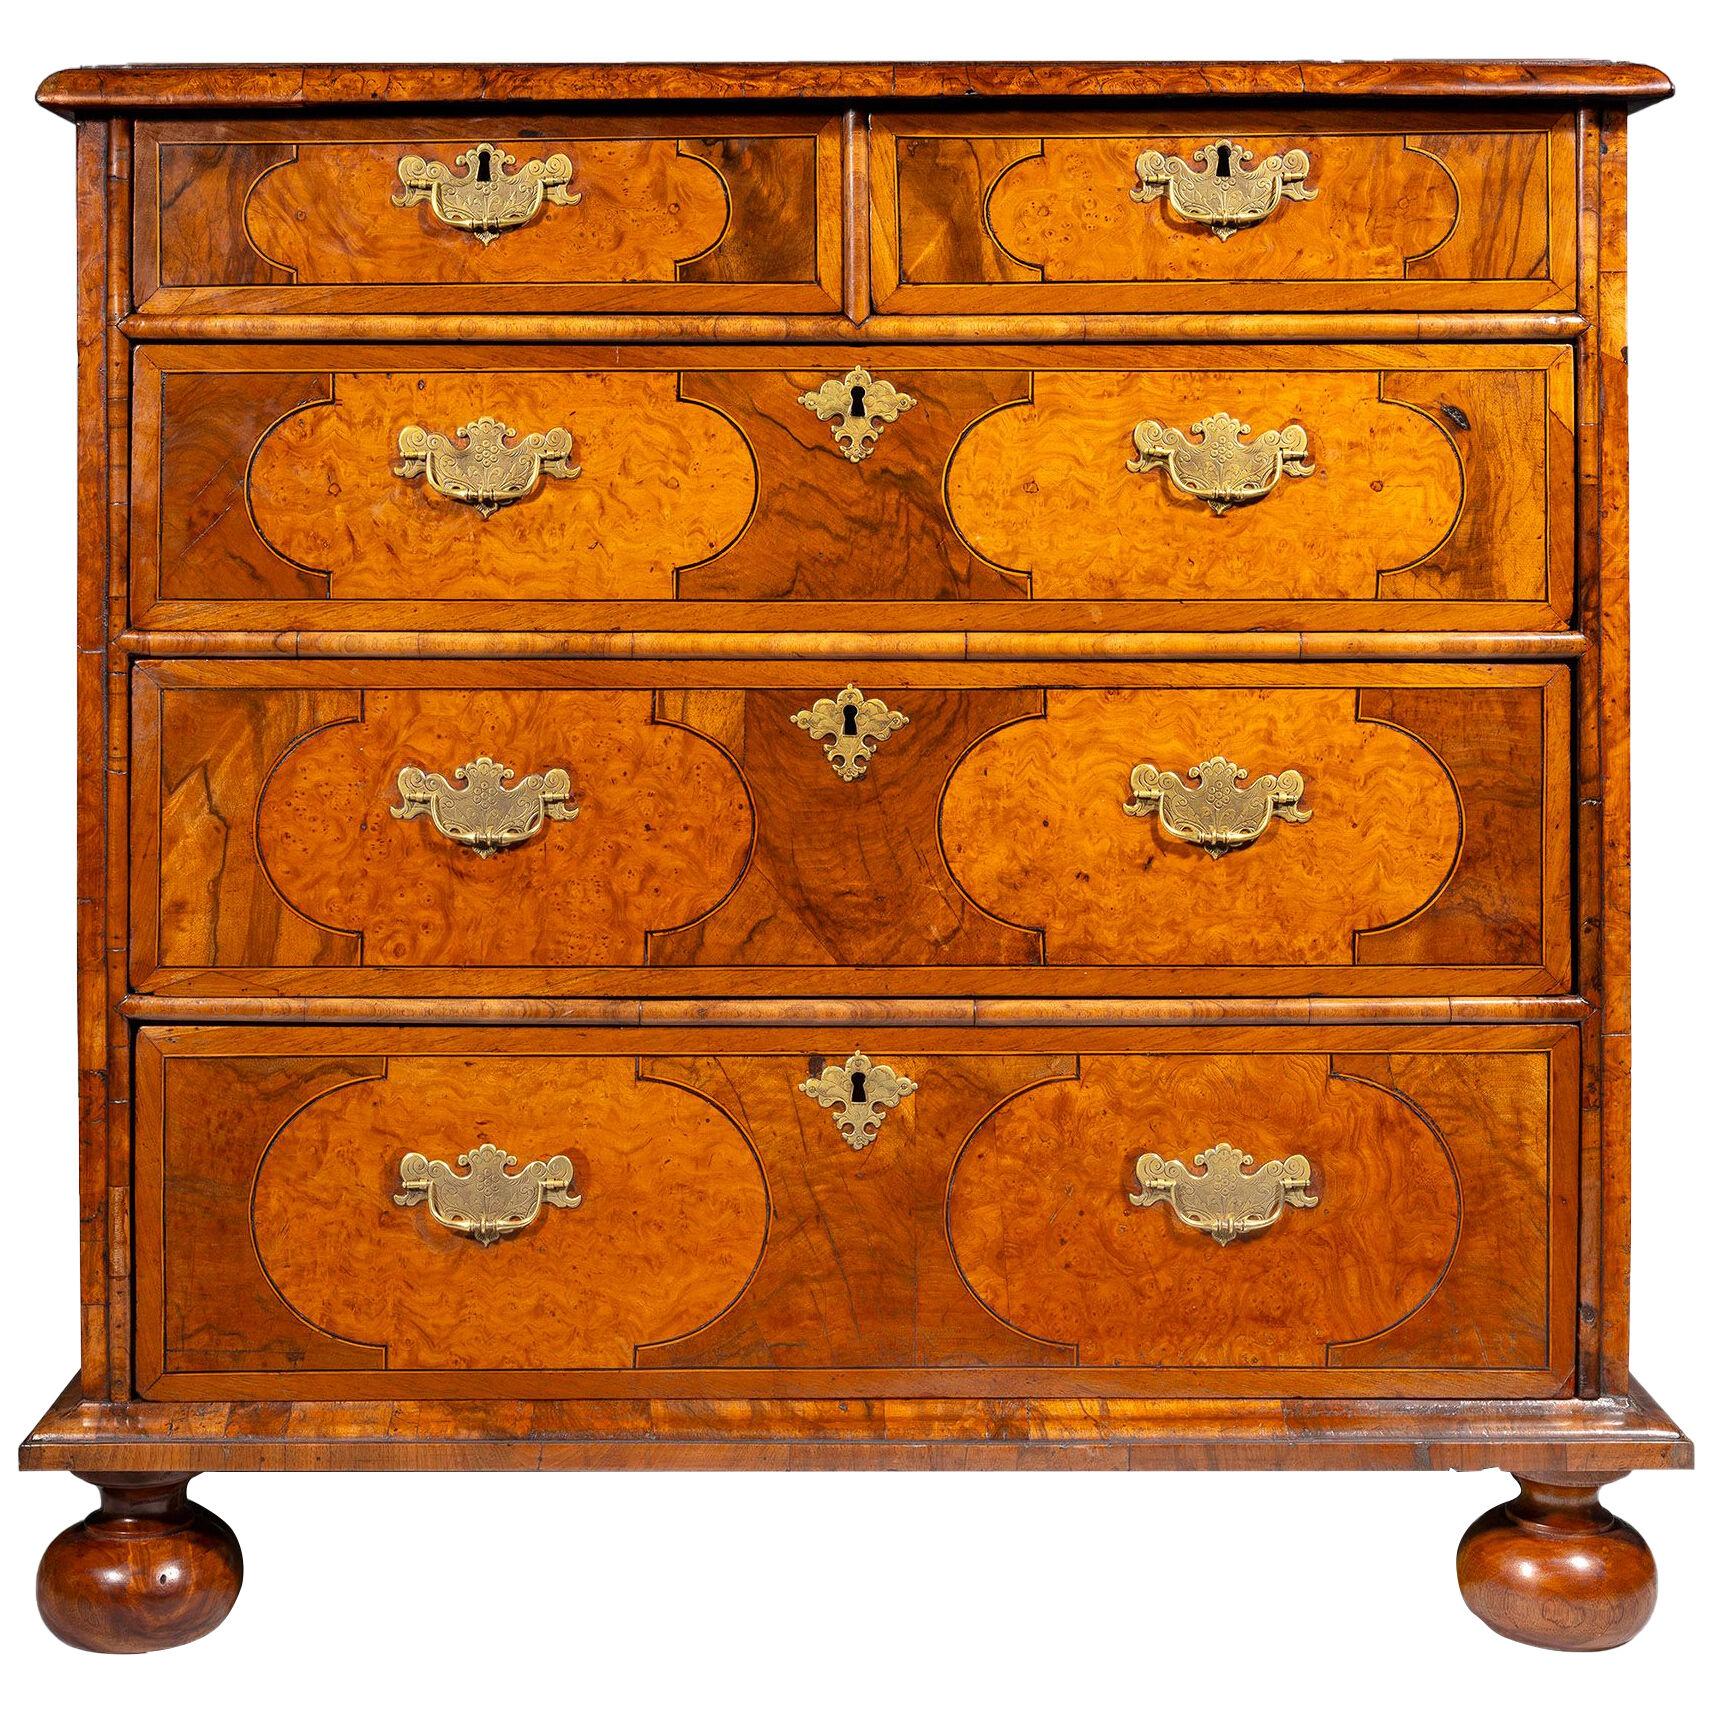 17th century William & Mary chest of drawers